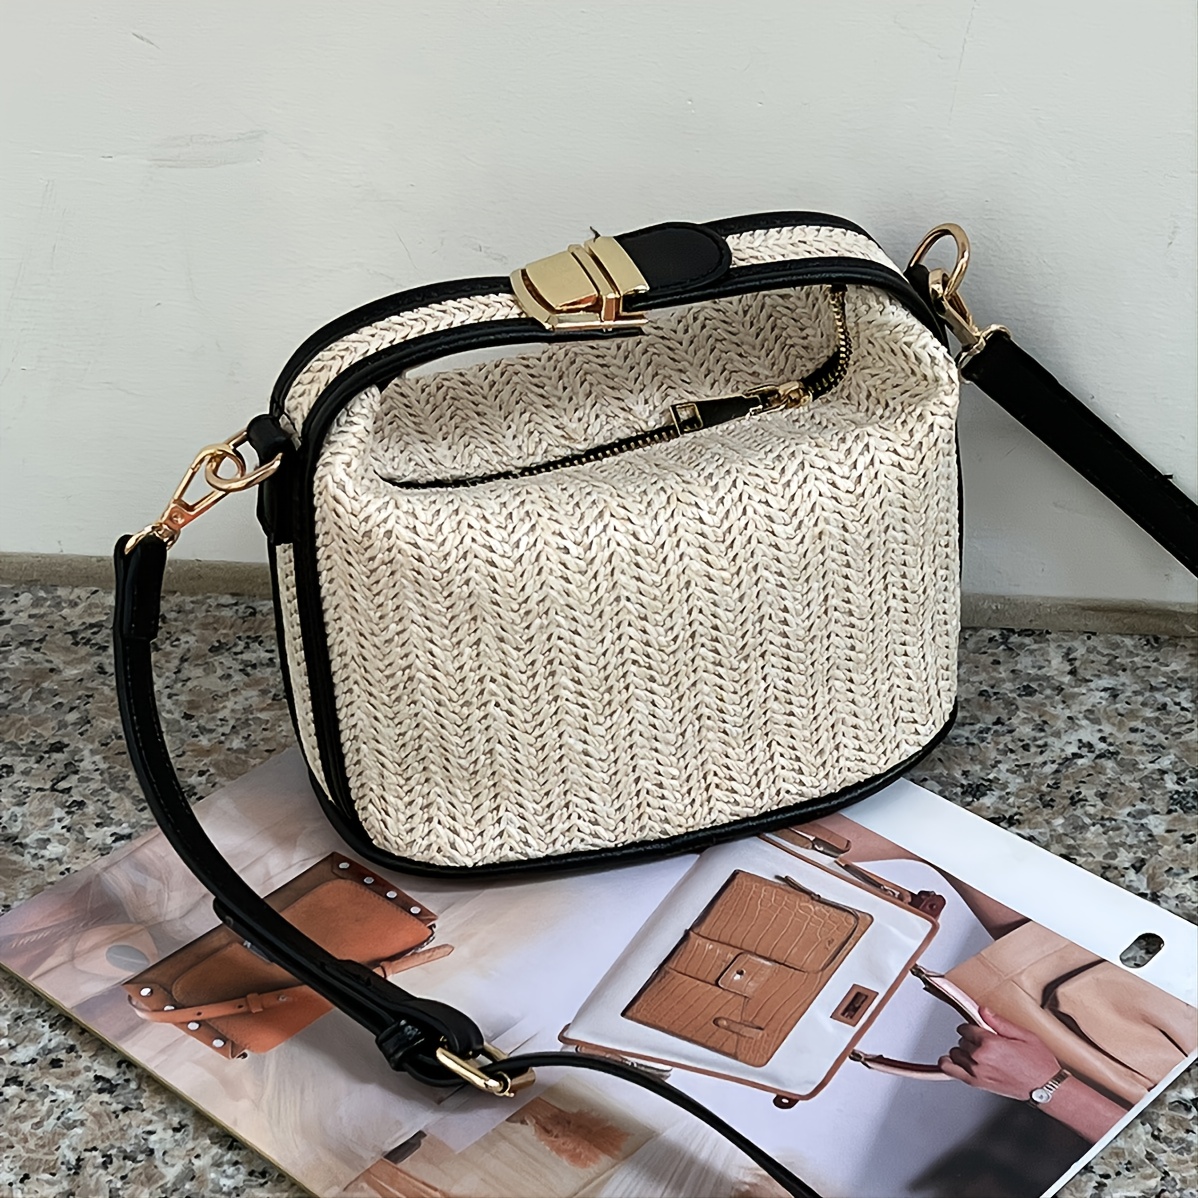 SW20383 Straw Crossbody Zipper Bag With Patterned Strap